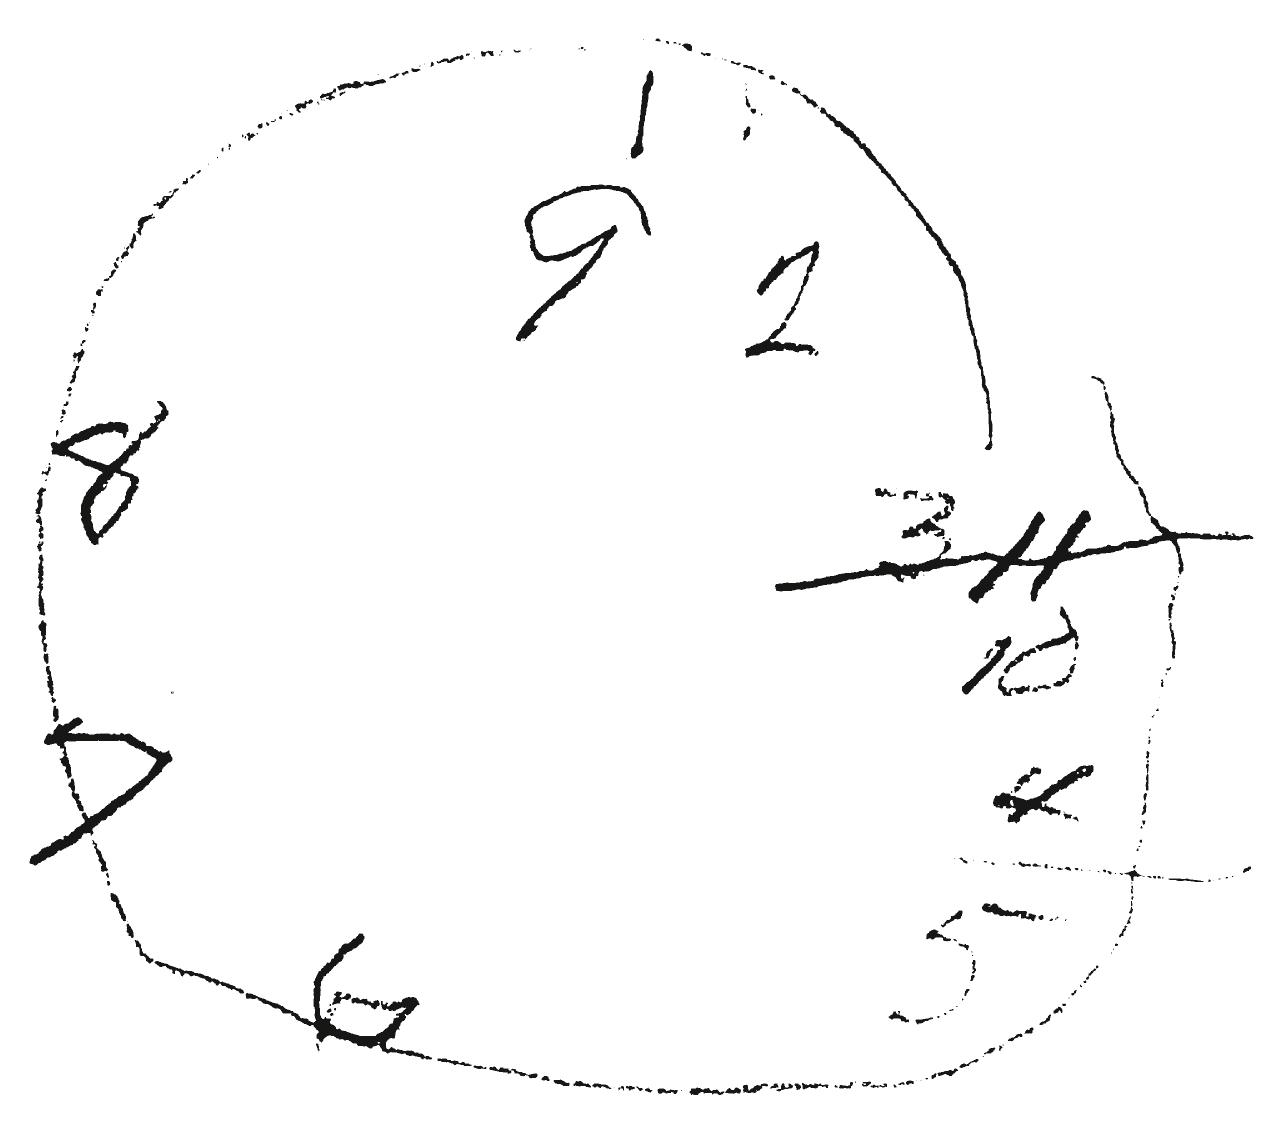 Fig. 33.3, A clock face drawn by a patient with a parietal lobe lesion.